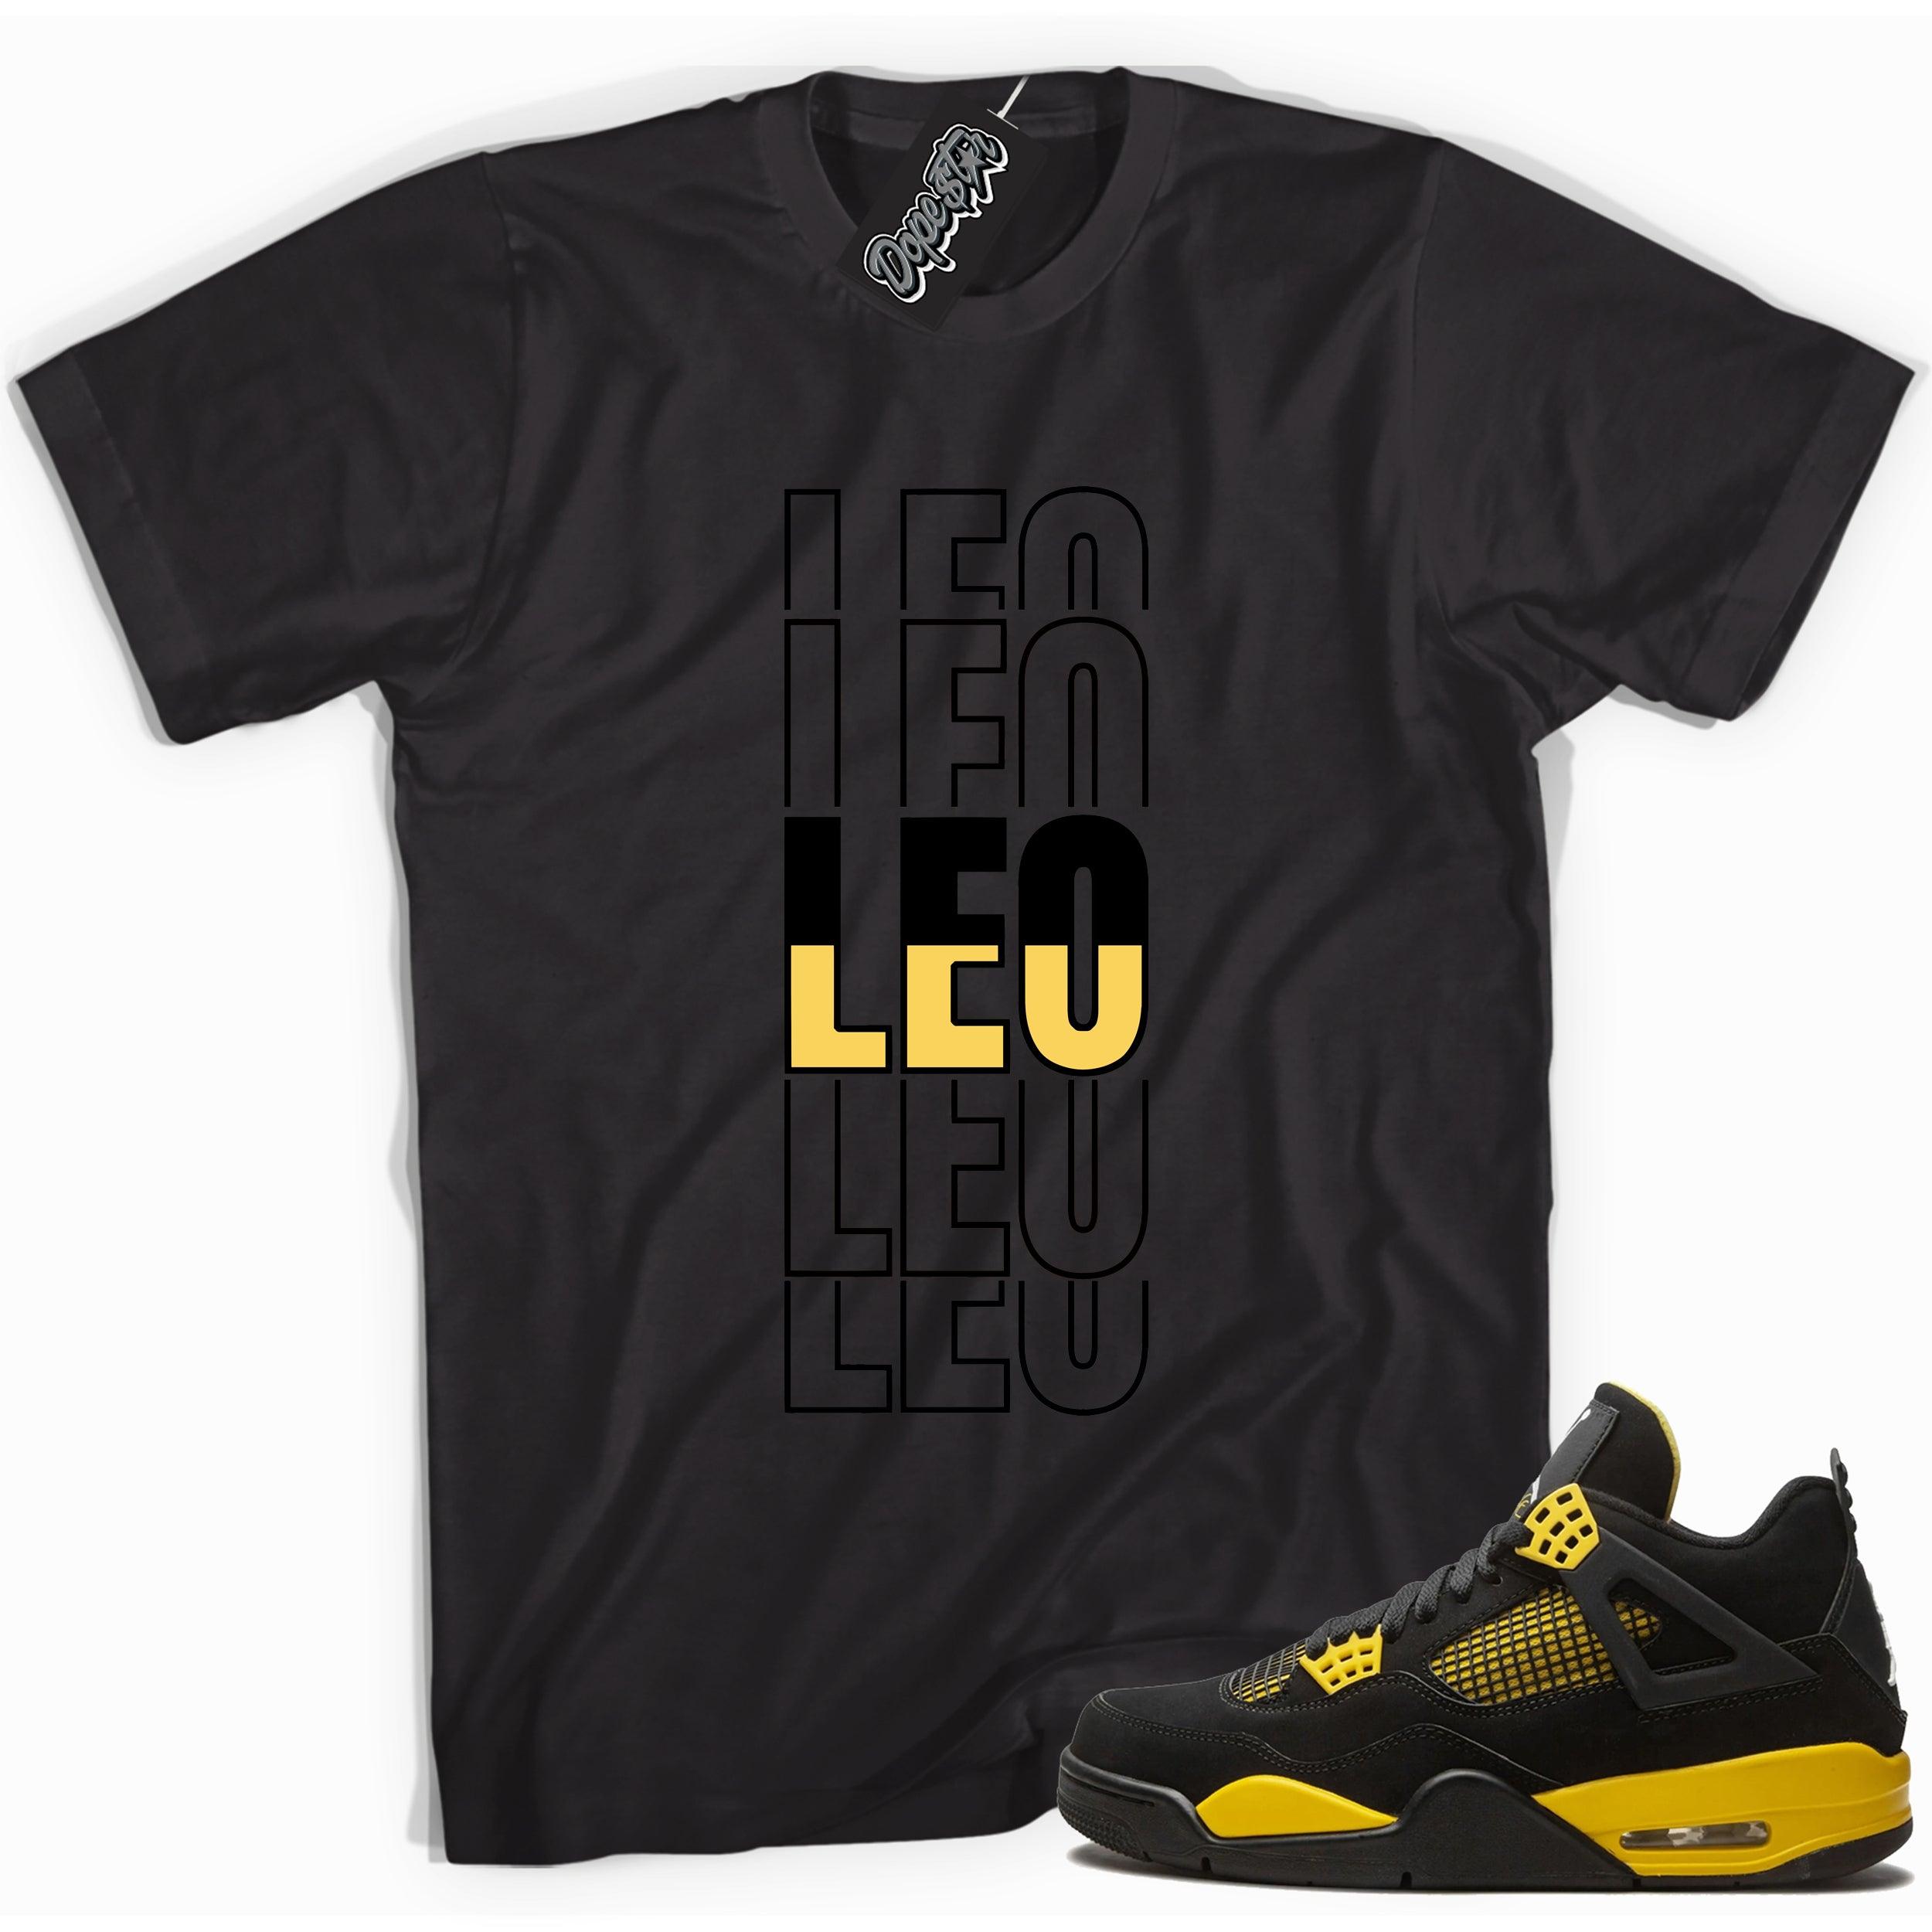 Cool black graphic tee with 'leo' print, that perfectly matches  Air Jordan 4 Thunder sneakers